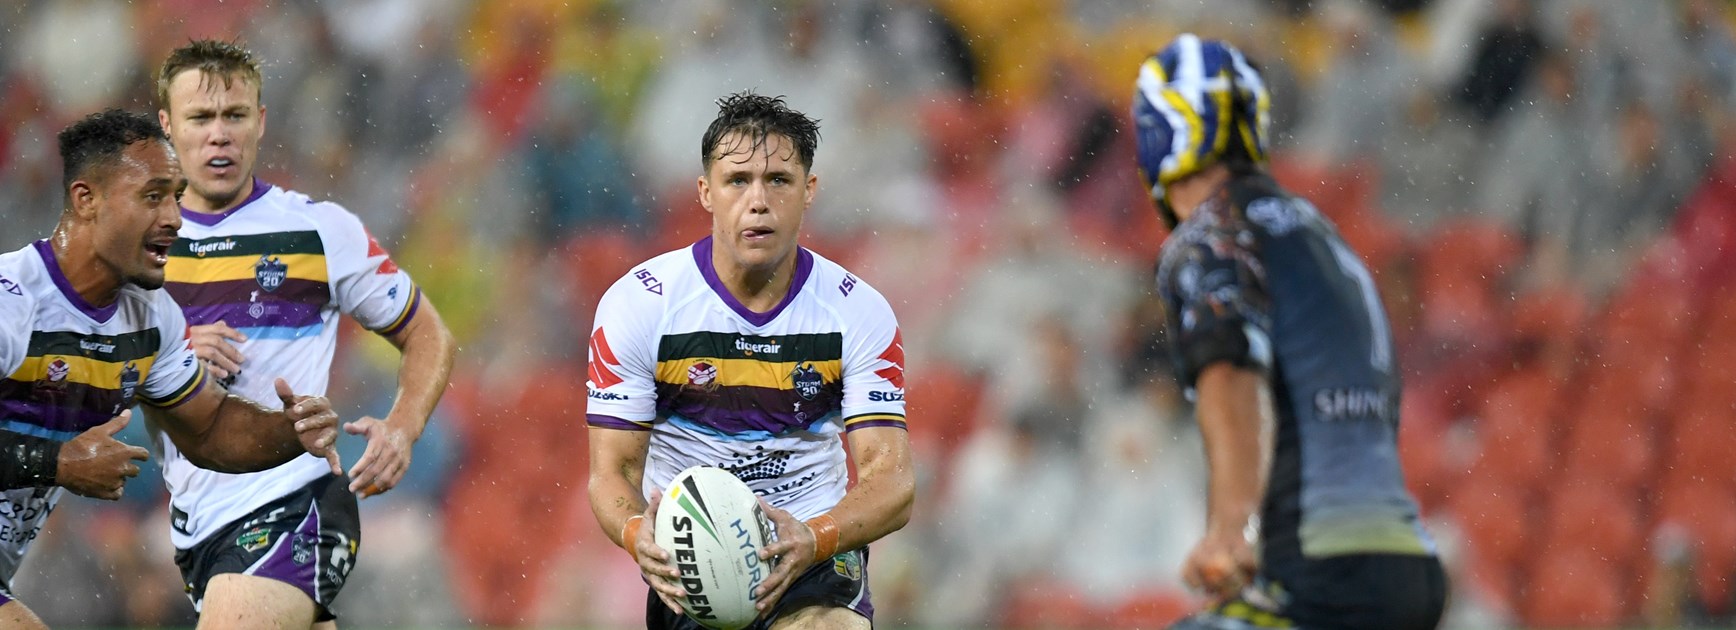 NRL signings: All the player transfers for the 2019 season